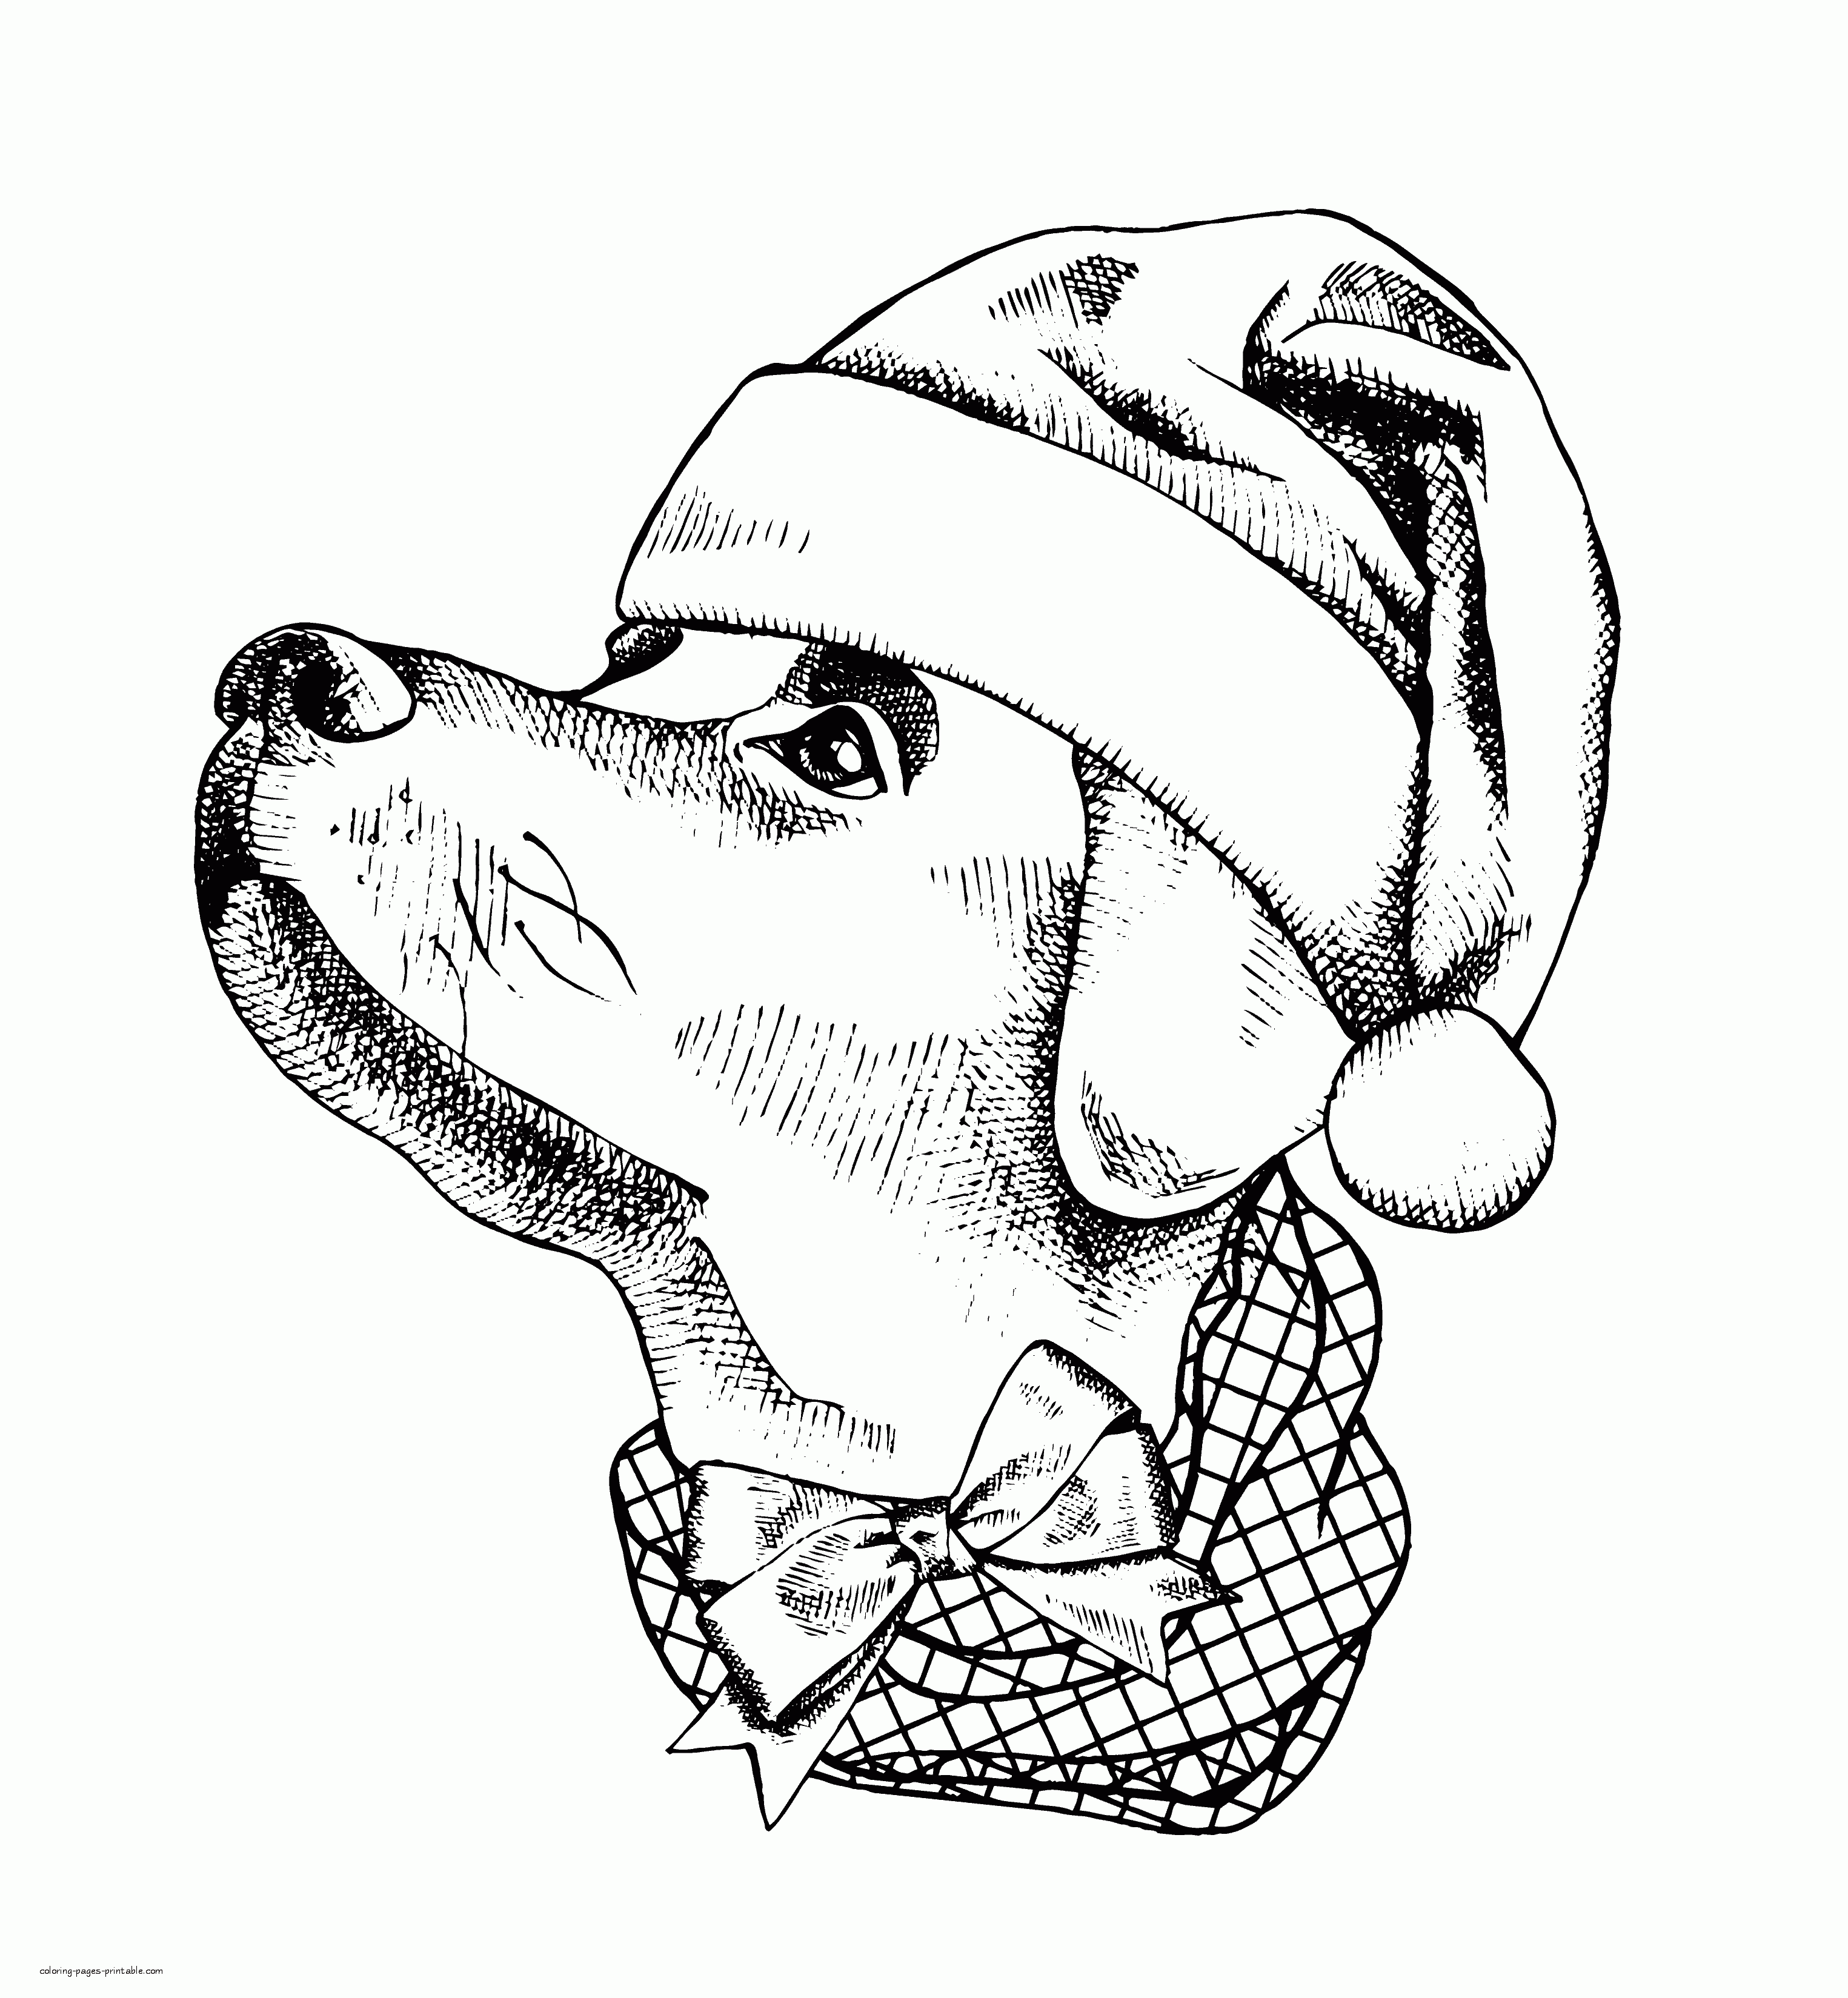 Real Dog Coloring Page For Adult    COLORING PAGES PRINTABLE.COM